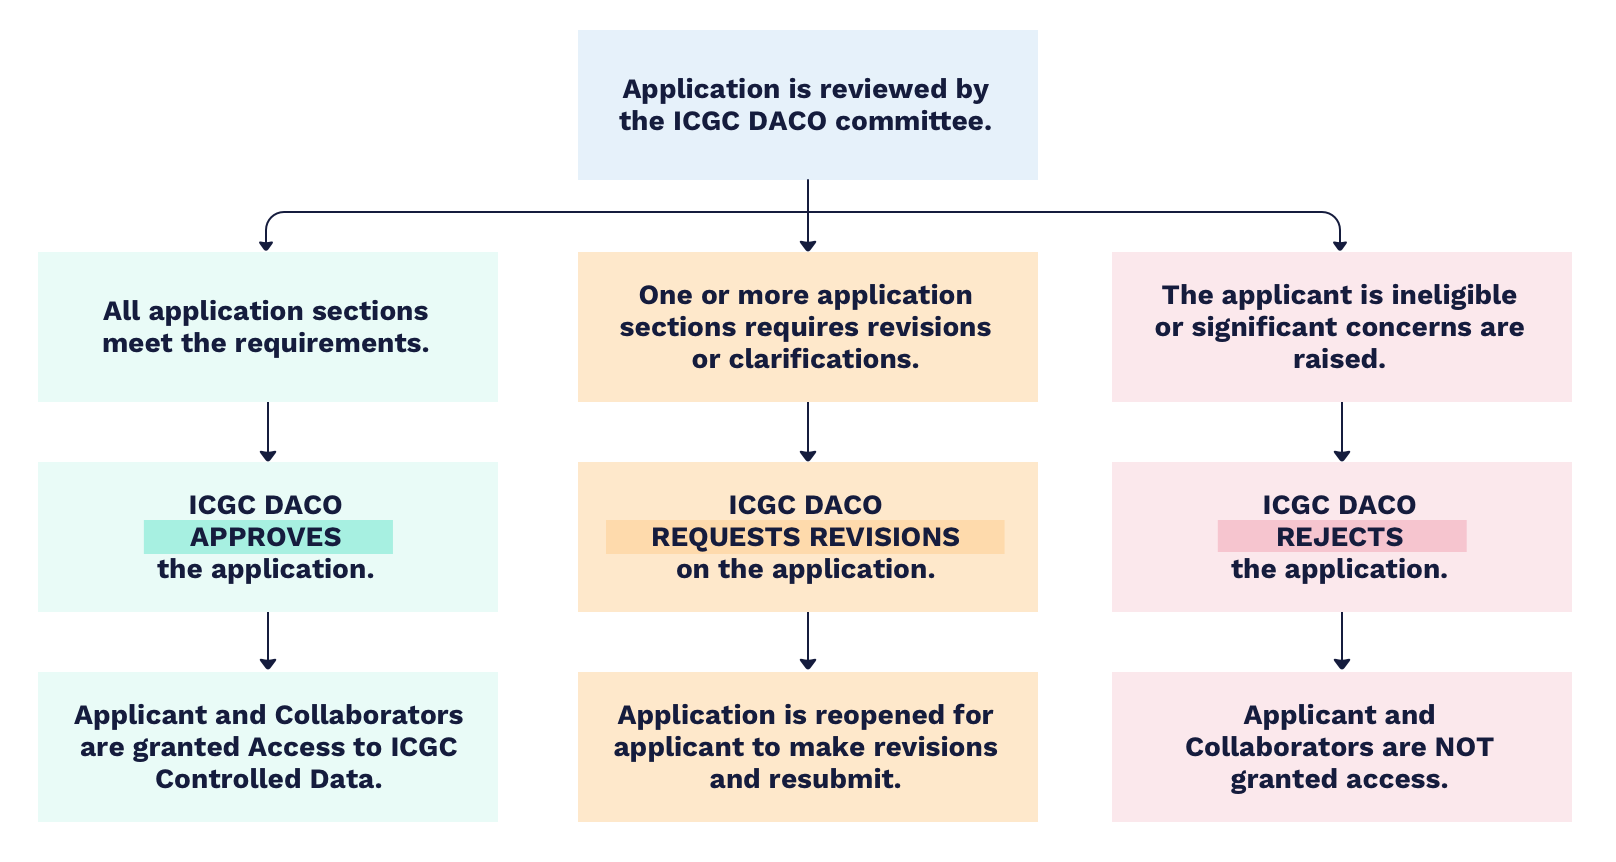 DACO Review Process with possible outcomes